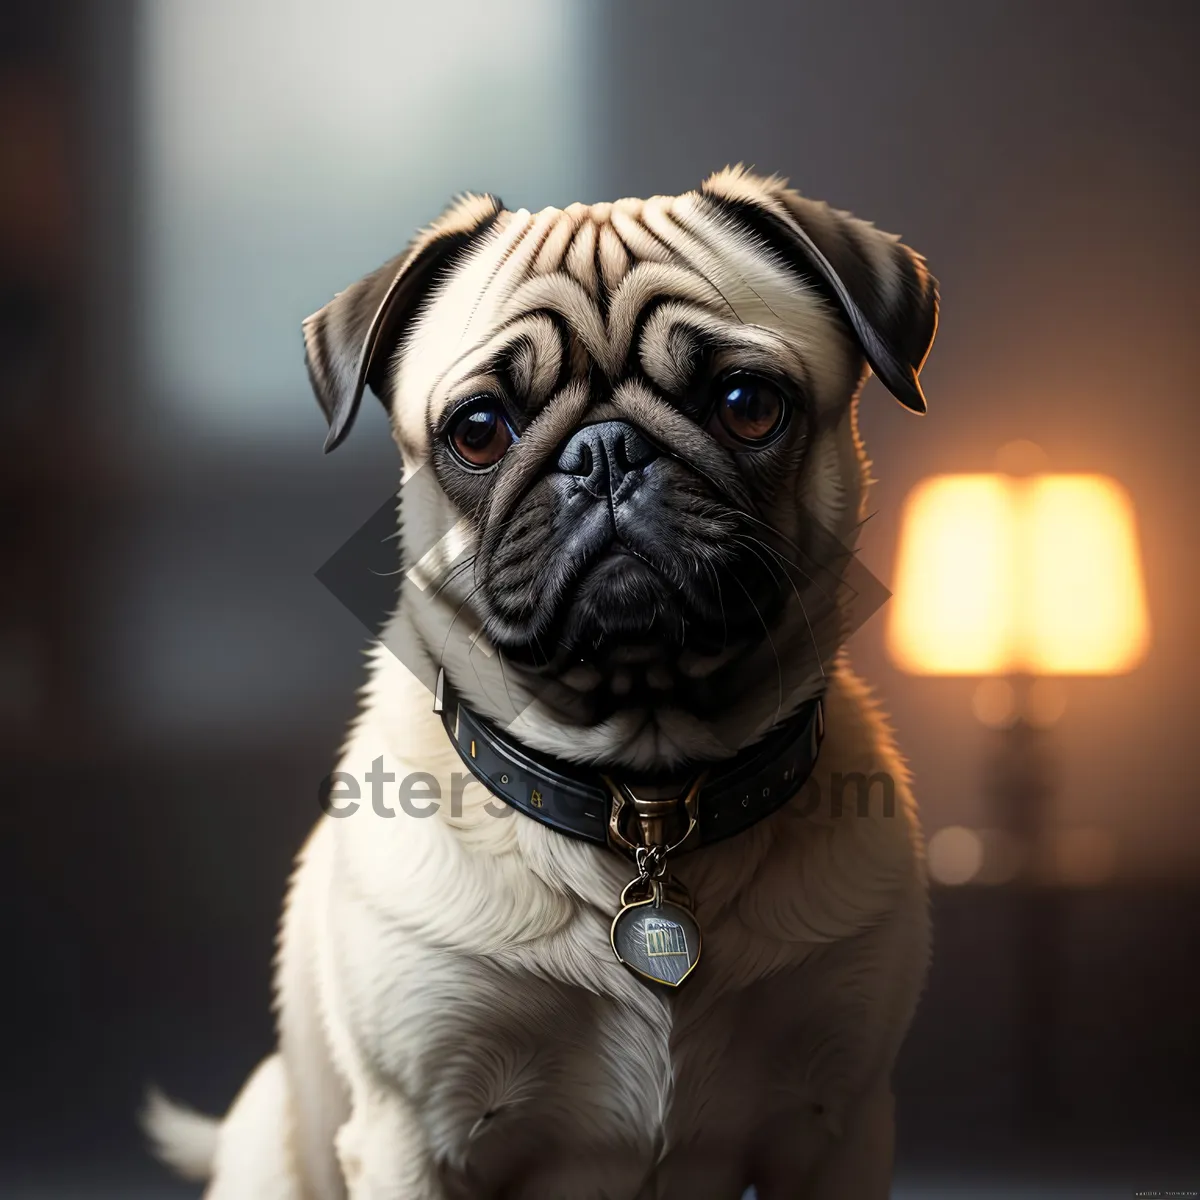 Picture of Cute Pug Puppy - Adorable Purebred Doggy Sitting